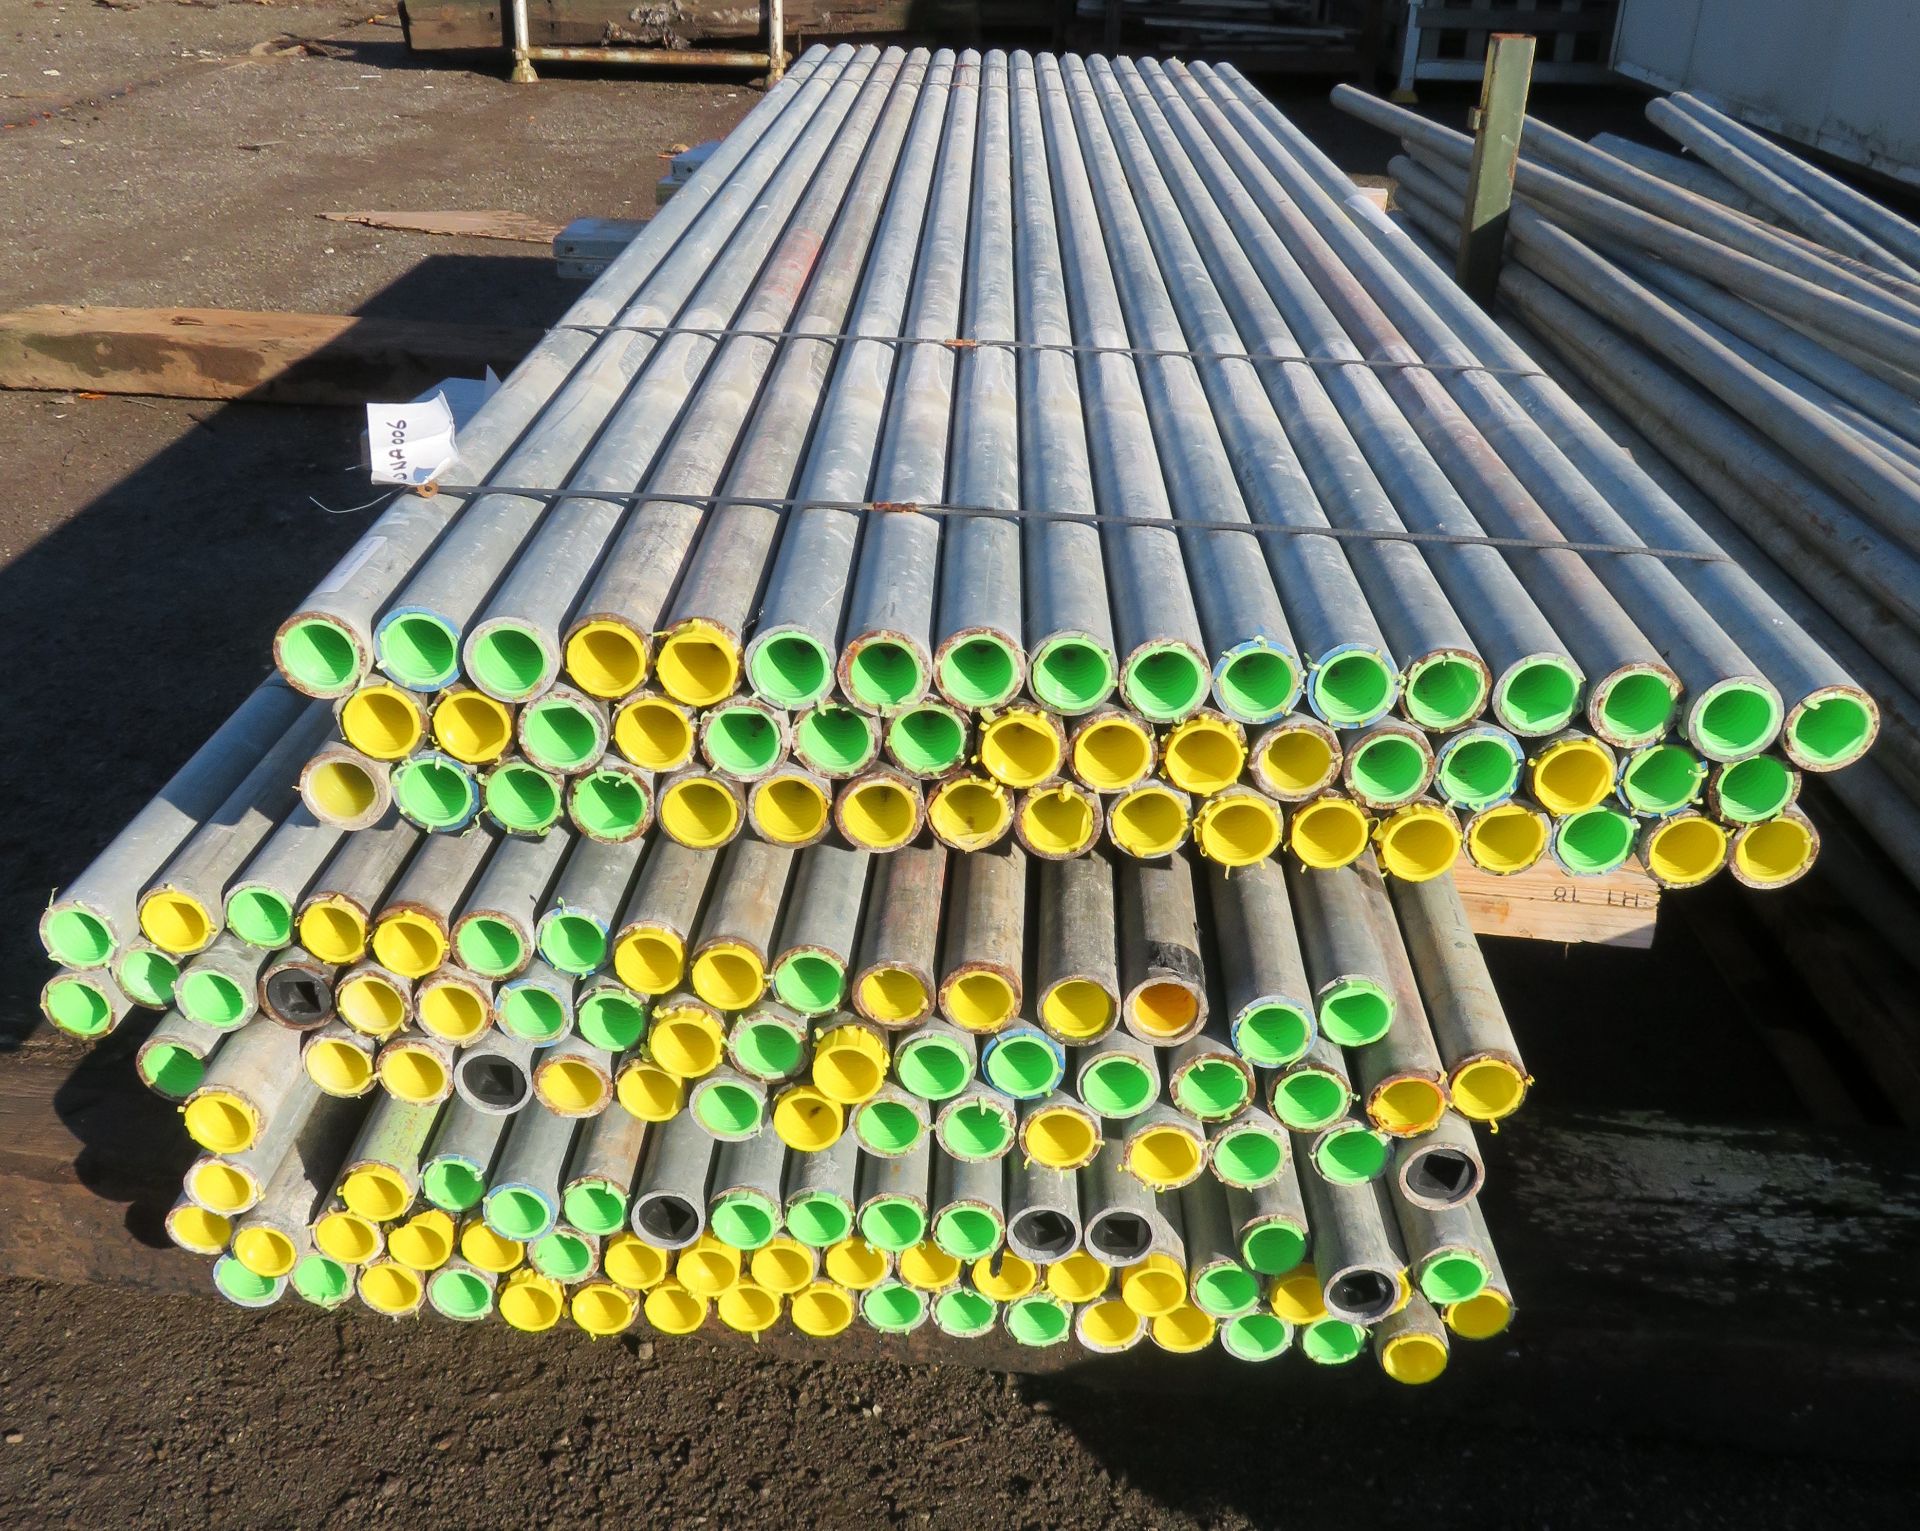 150x 10ft Galvanised Steel Scaffolding Poles 48mm Diameter x 4mm Thick. - Image 3 of 4